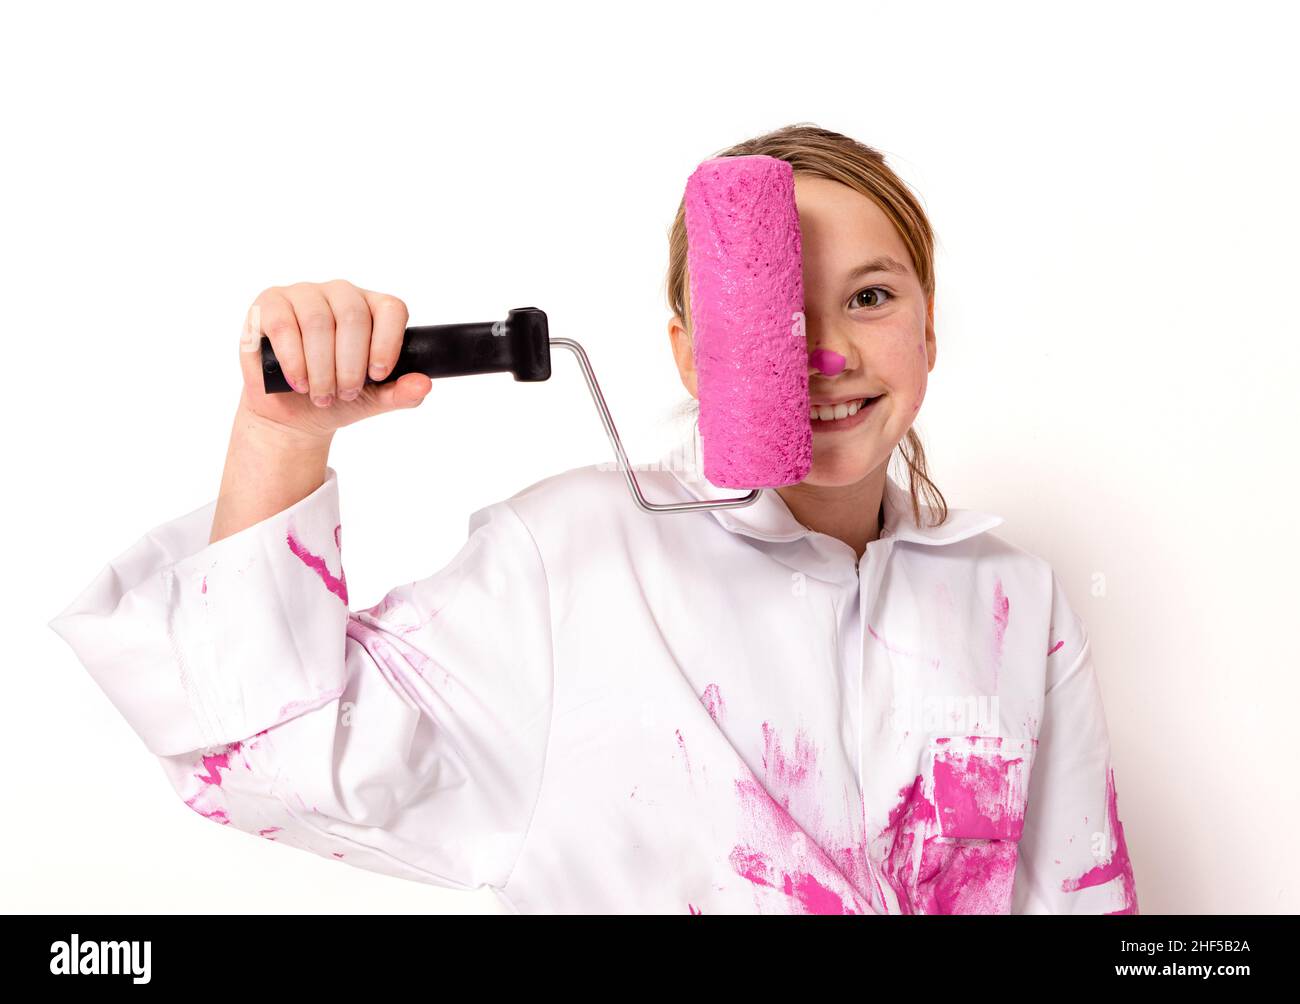 Young girl, 10 years old, holding a roller with pink paint in front of her face. She is looking at the camera with a friendly smile. Stock Photo